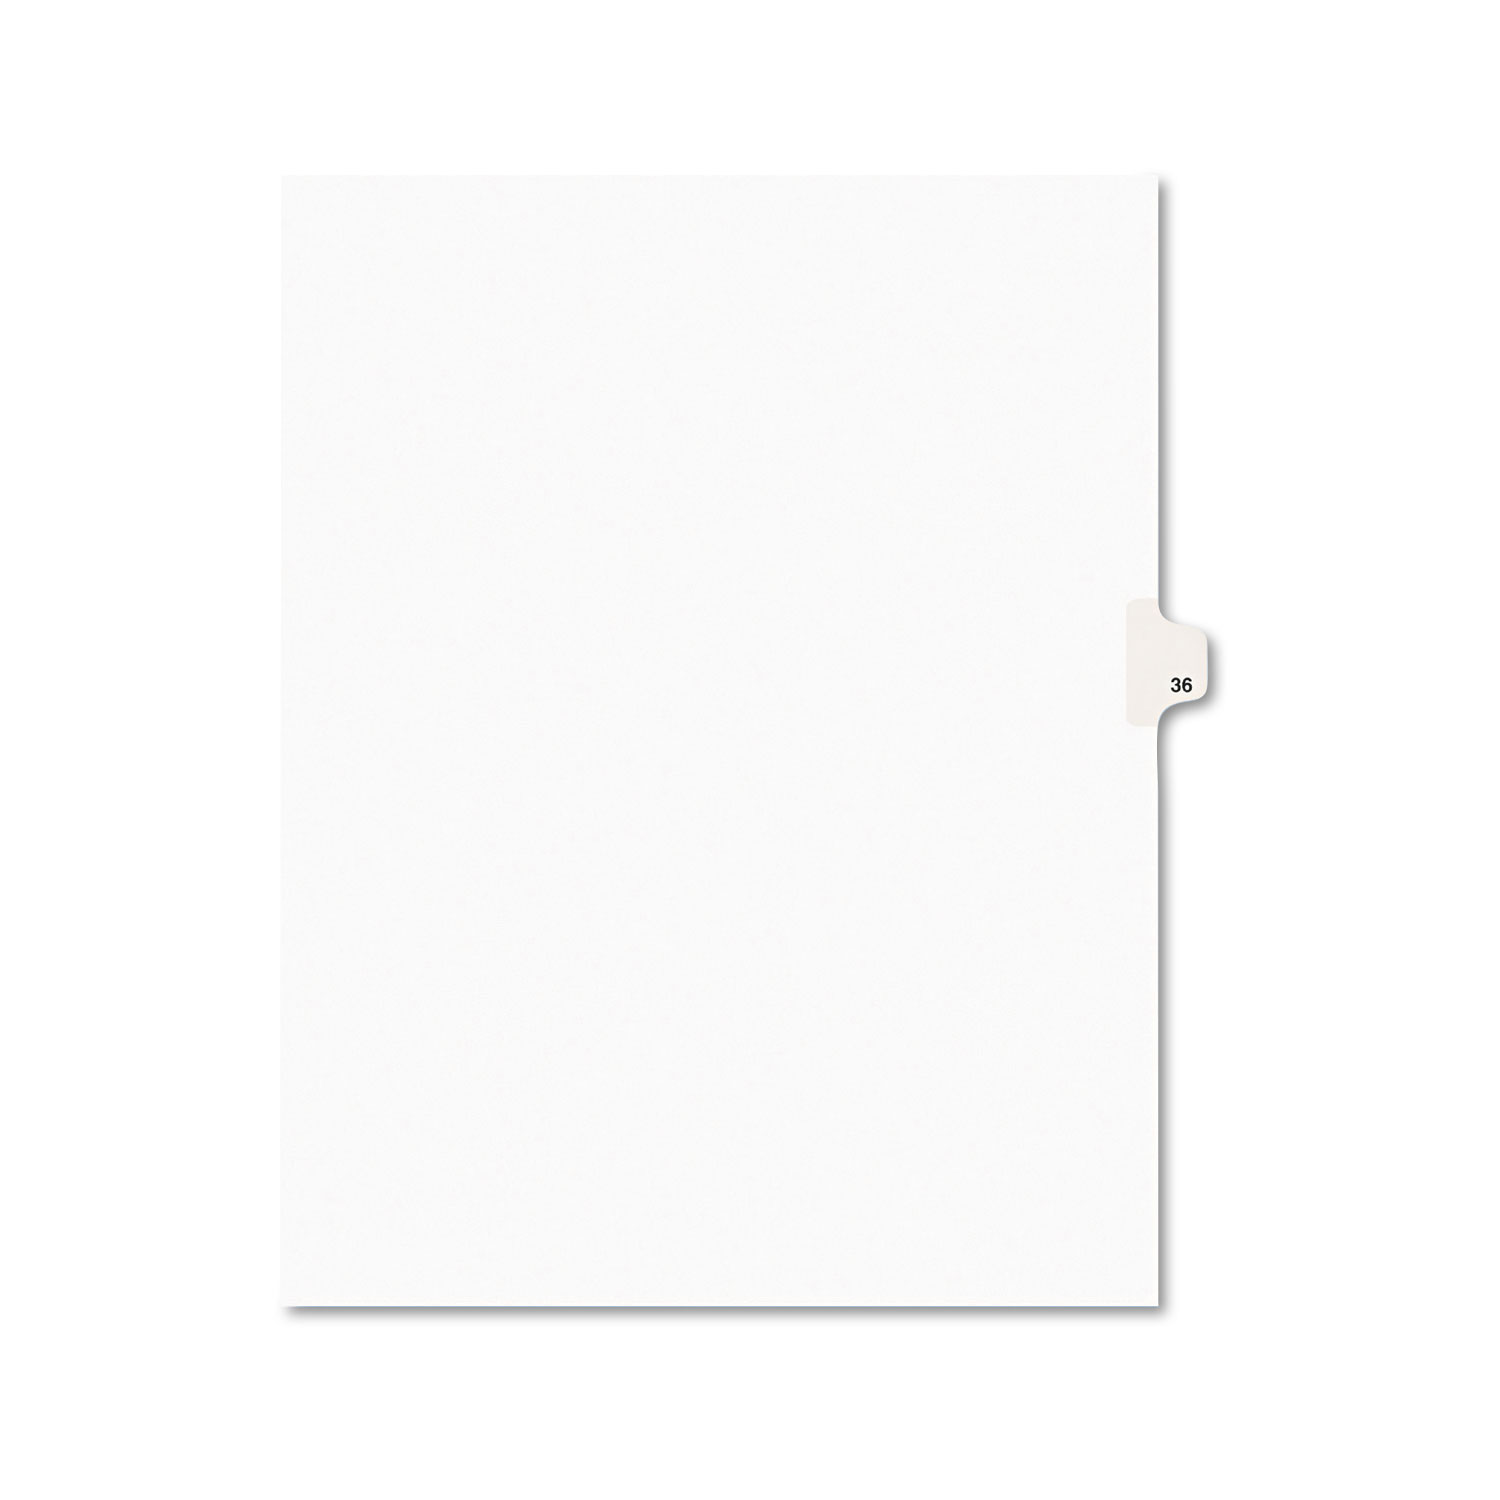  Avery 01036 Preprinted Legal Exhibit Side Tab Index Dividers, Avery Style, 10-Tab, 36, 11 x 8.5, White, 25/Pack (AVE01036) 